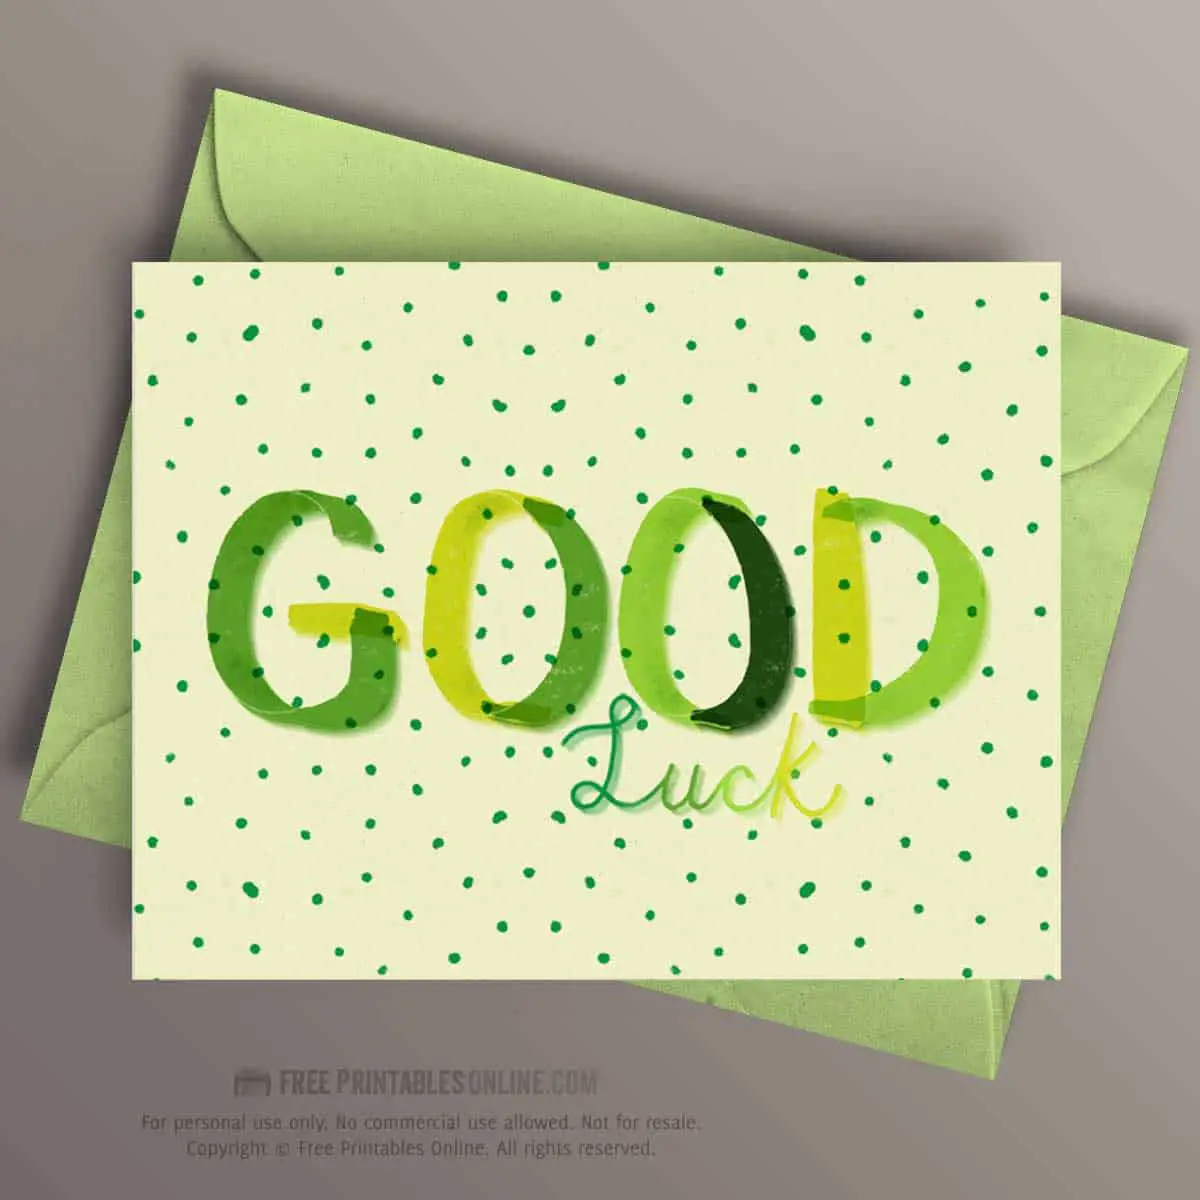 Good Luck Note Card - Free Printables Online